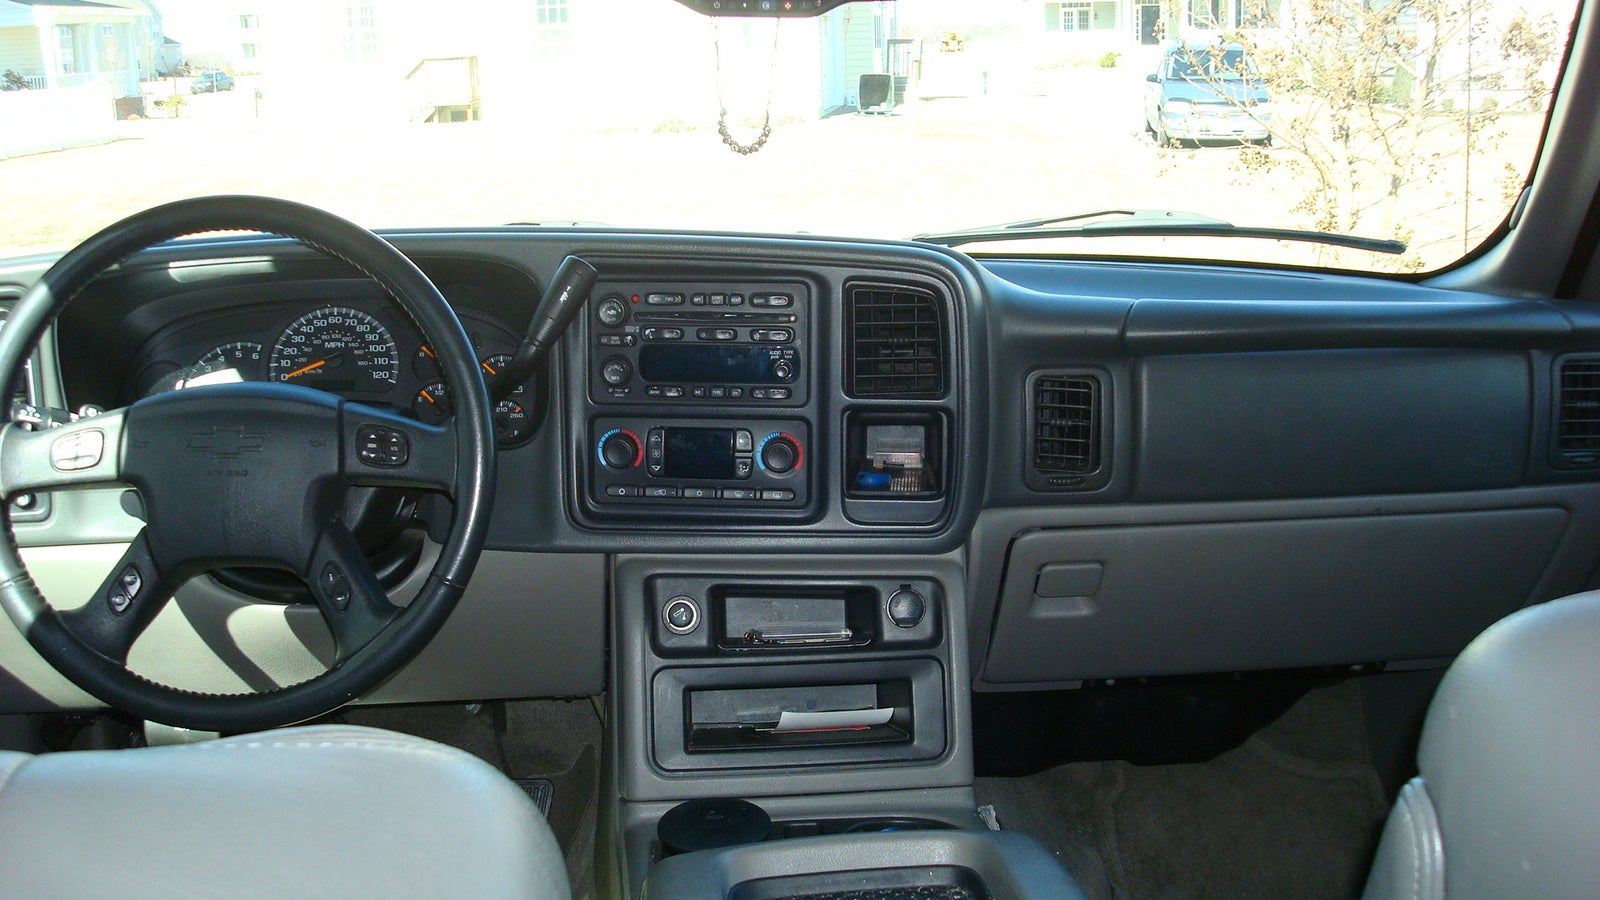 Suburban  on 2005 Chevrolet Suburban 4 Dr 1500 Z71 4wd Suv   Interior Pictures